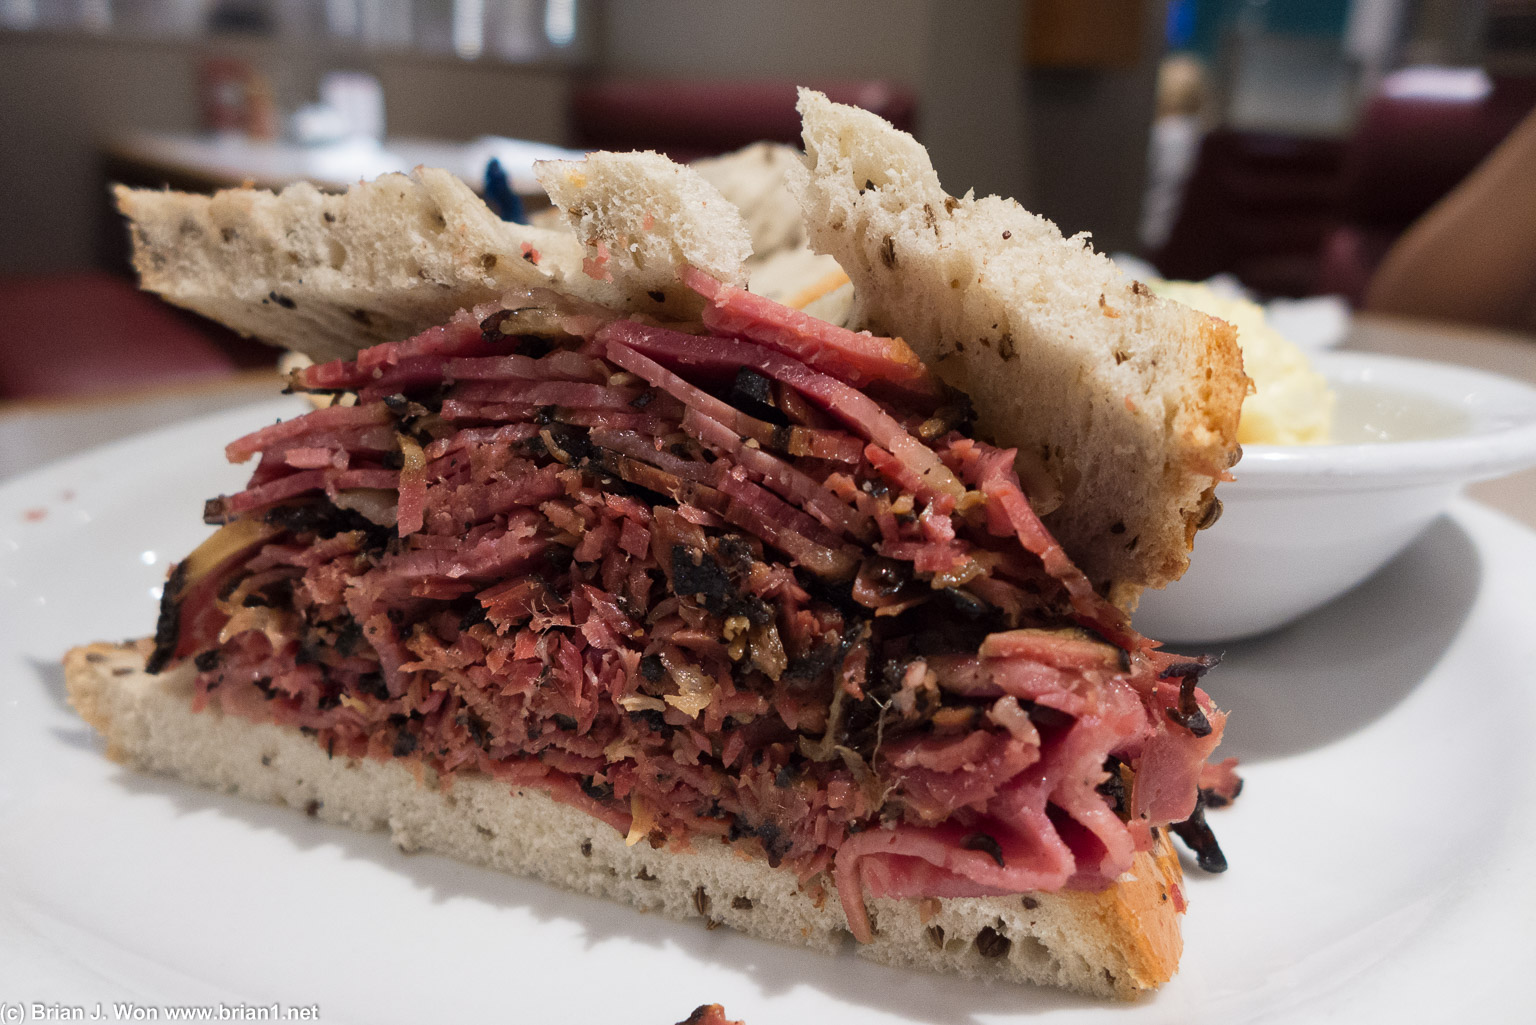 Rye was okay, pastrami was meh-- lots of small bits fell out as we ate. Cheap cut?